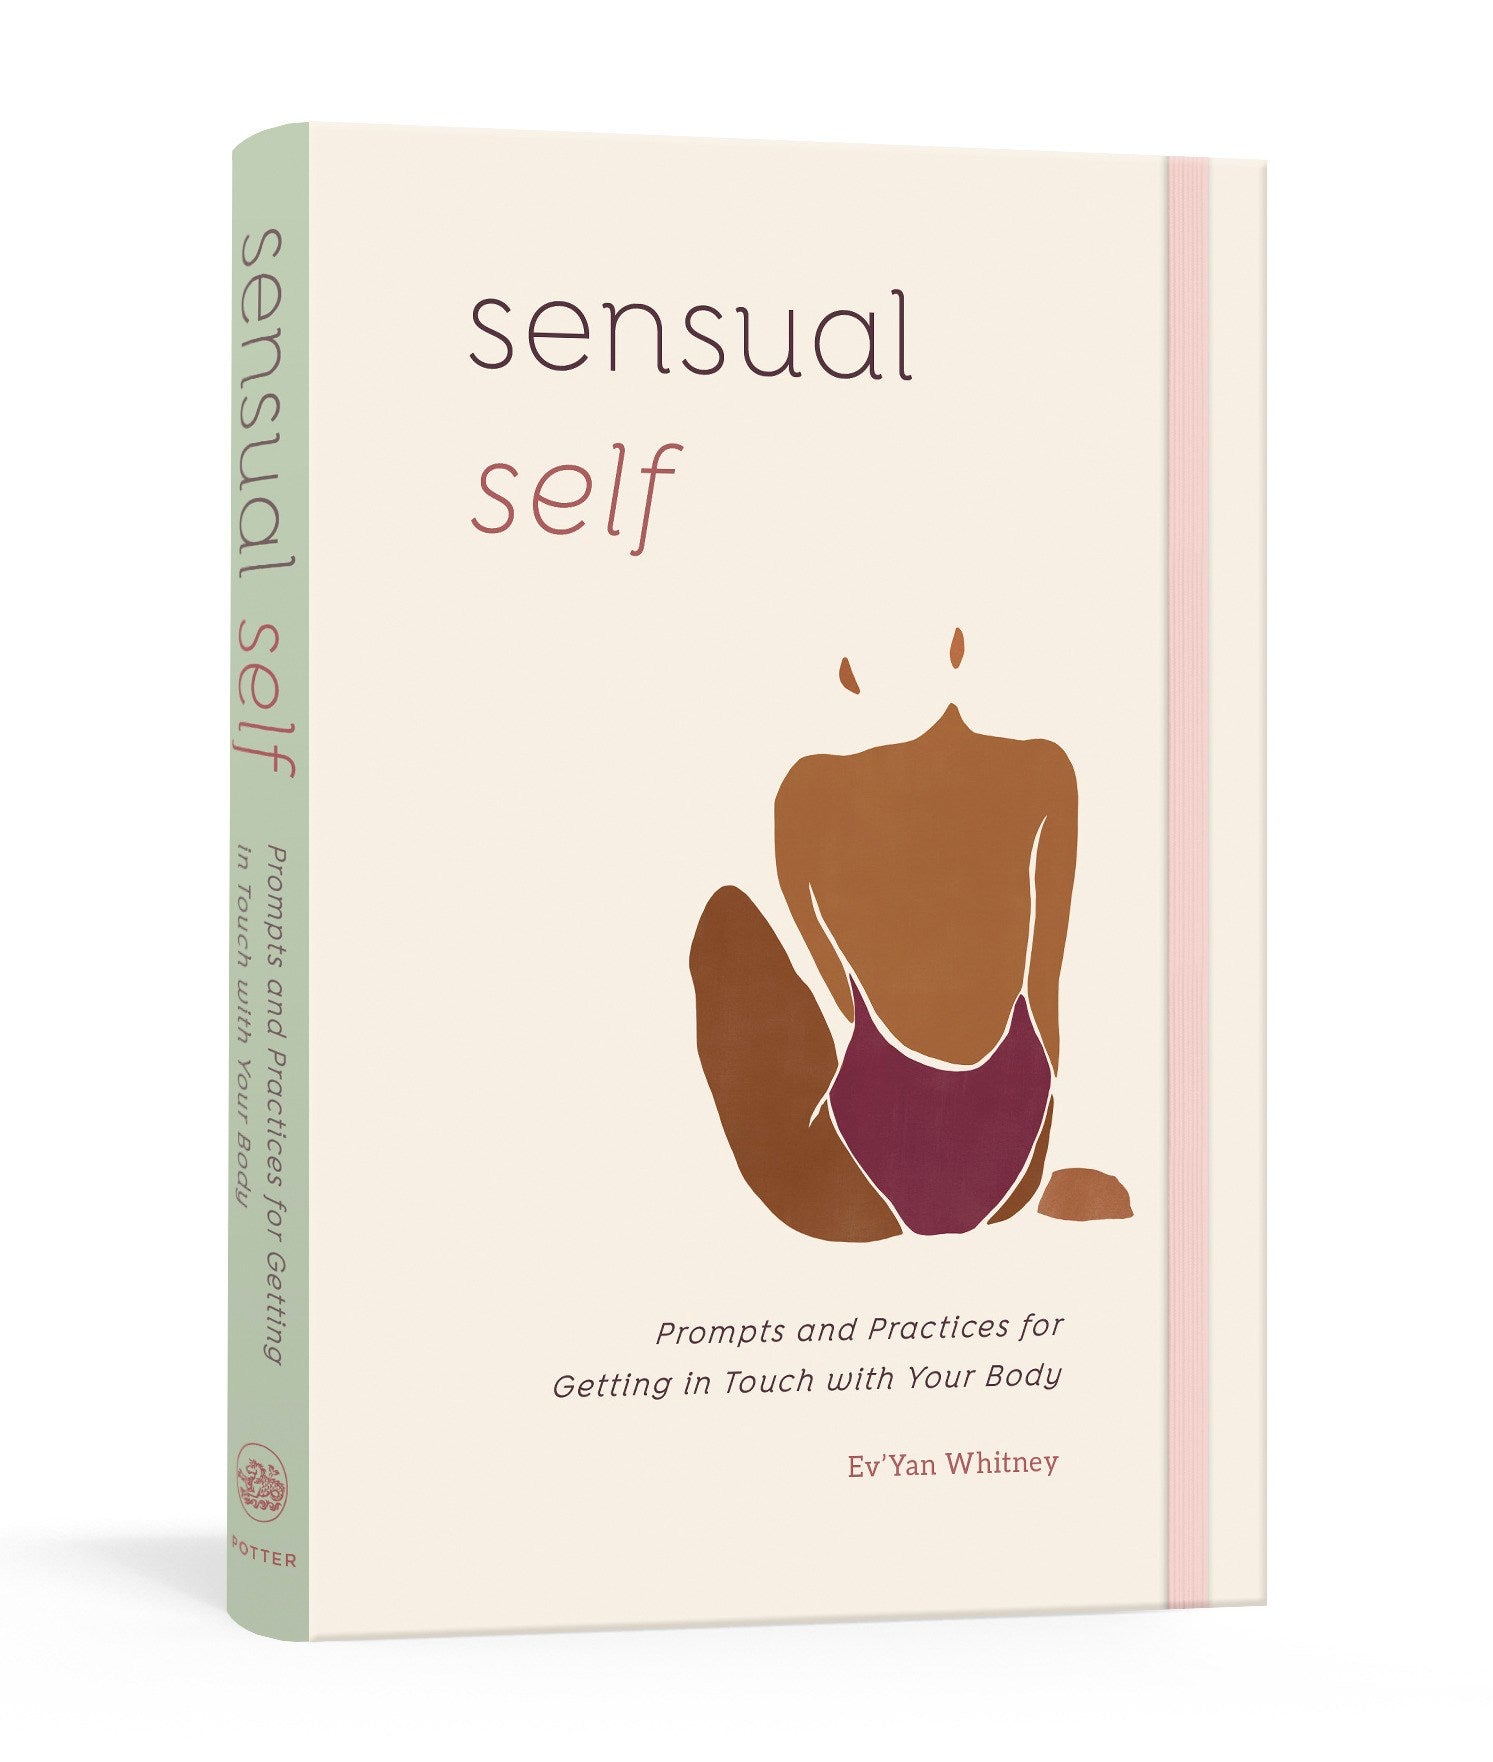 Sensual Self: Prompts and Practices for Getting in Touch with Your Body: A Guided Journal